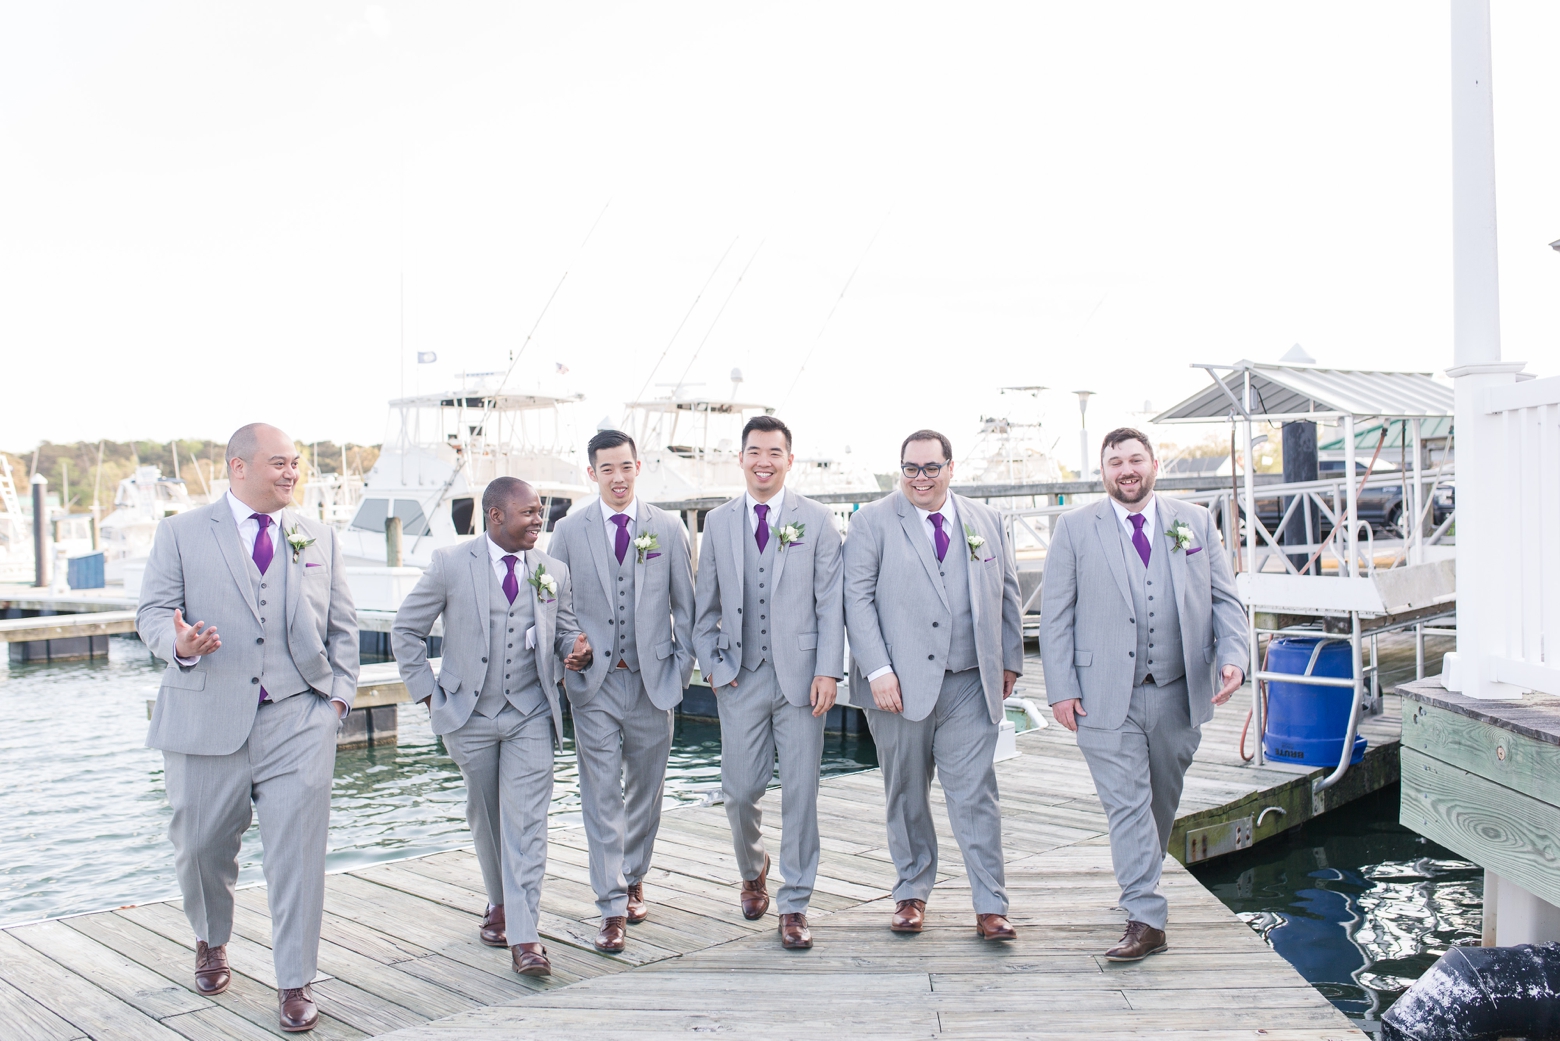 The Water Table Wedding Virginia Beach by Angie McPherson Photography